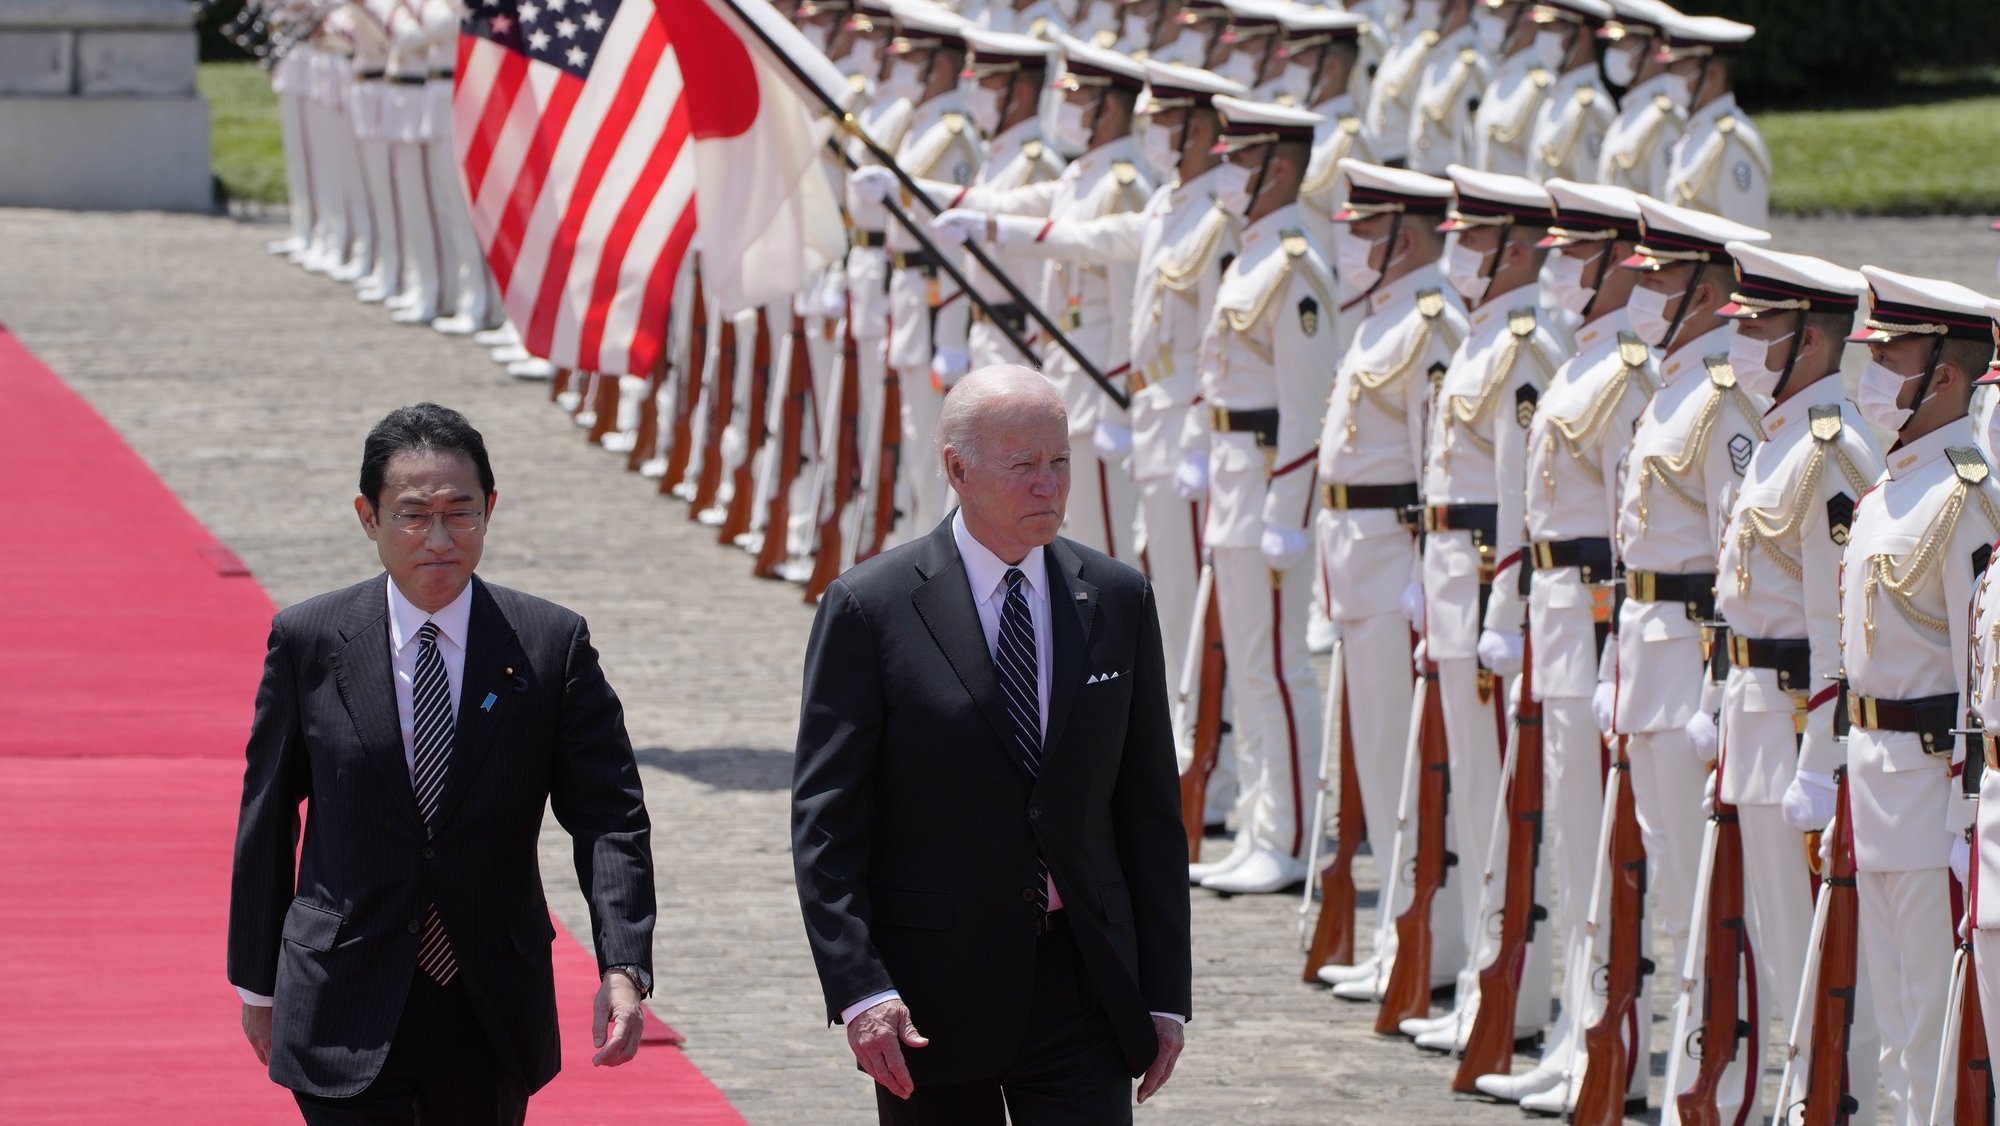 epa09968111 US President Joe Biden (R) and Japan&#039;s Prime Minister Fumio Kishida (L) review an honor guard during a welcome ceremony for President Biden, at the Akasaka Palace state guest house in Tokyo, Japan, 23 May 2022.  EPA/Eugene Hoshiko / POOL